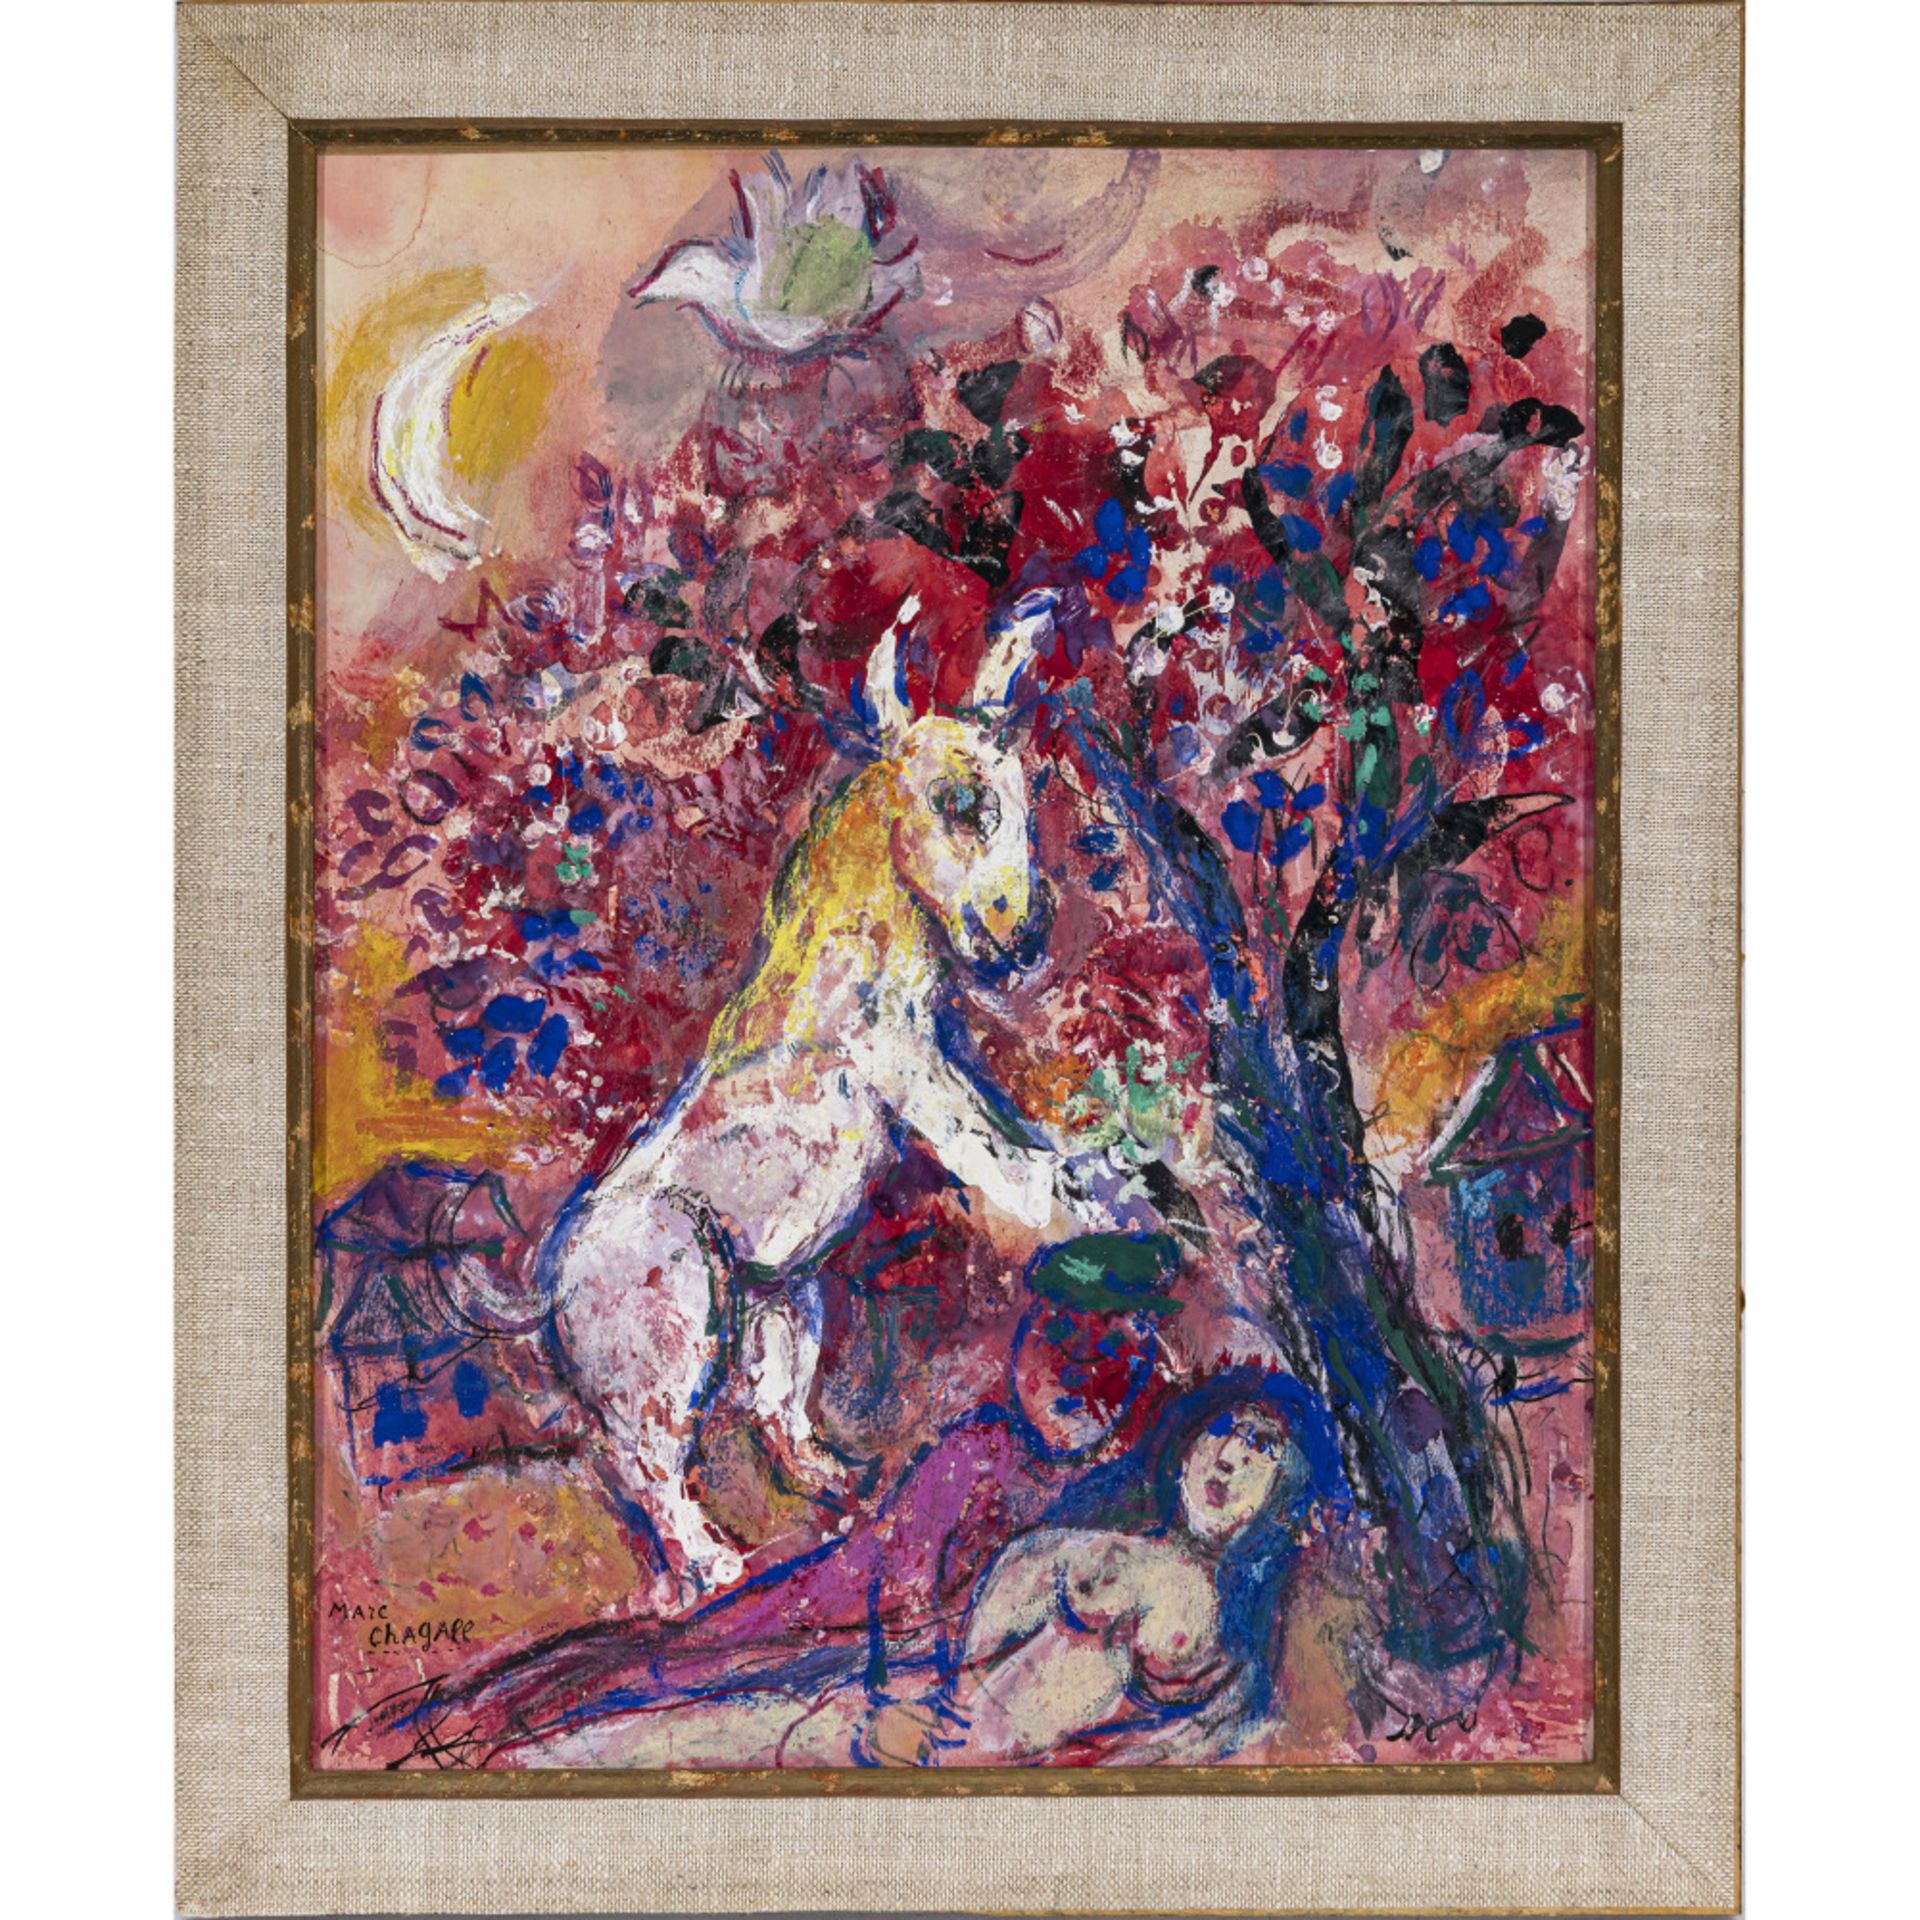 Marc Chagall - Les fiancés au pied de larbre. (The betrothed at the foot of the tree). 1956-1960 - Image 2 of 3